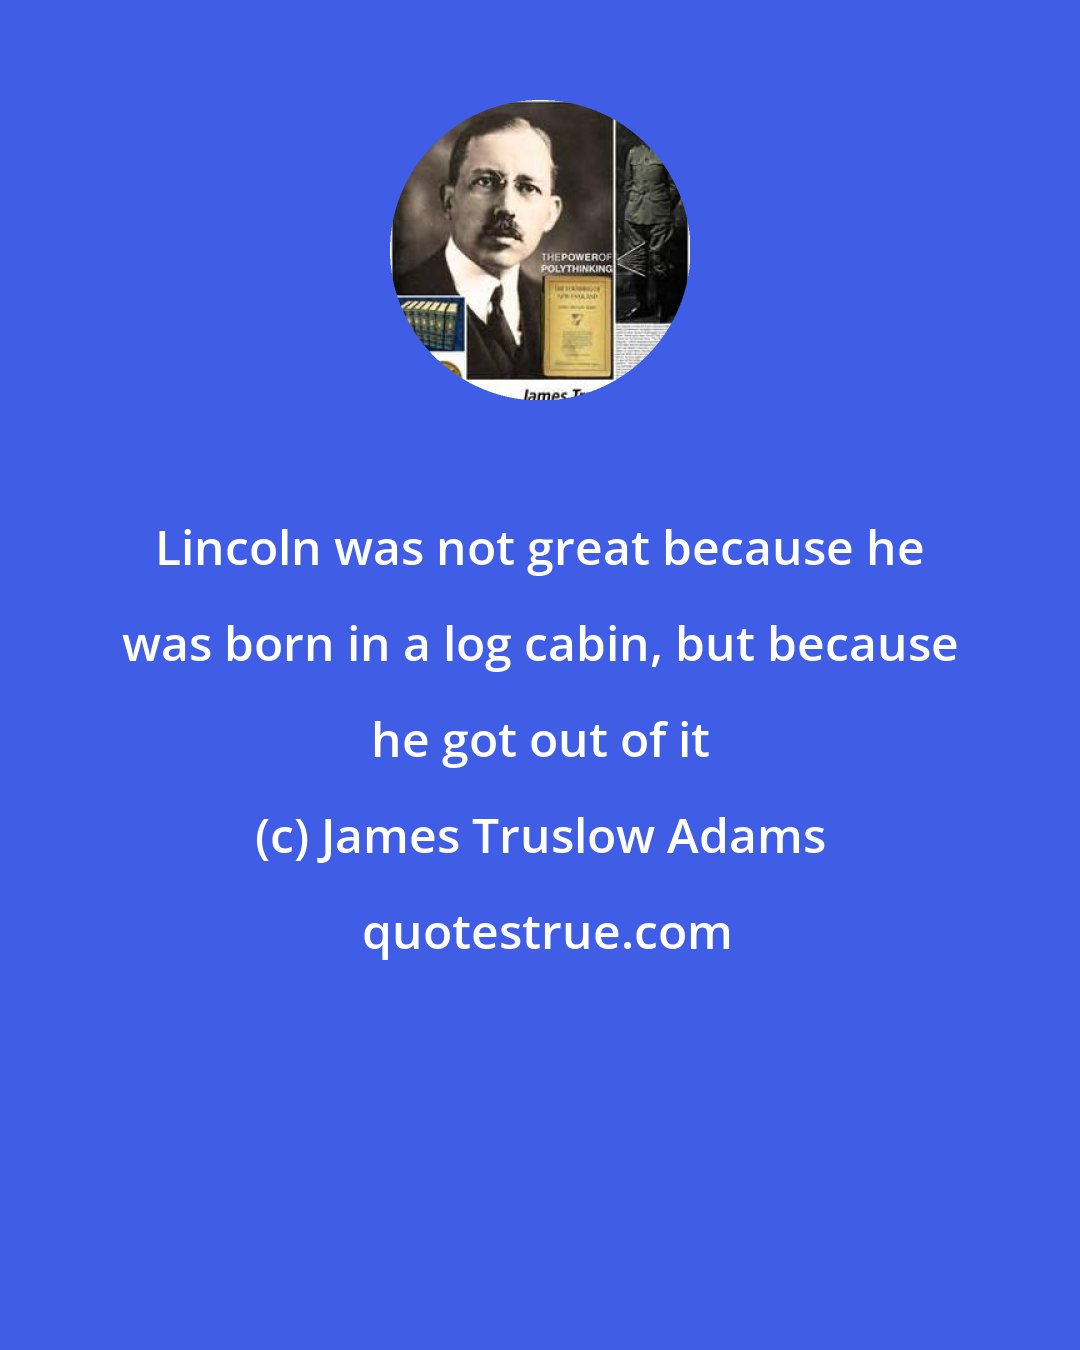 James Truslow Adams: Lincoln was not great because he was born in a log cabin, but because he got out of it